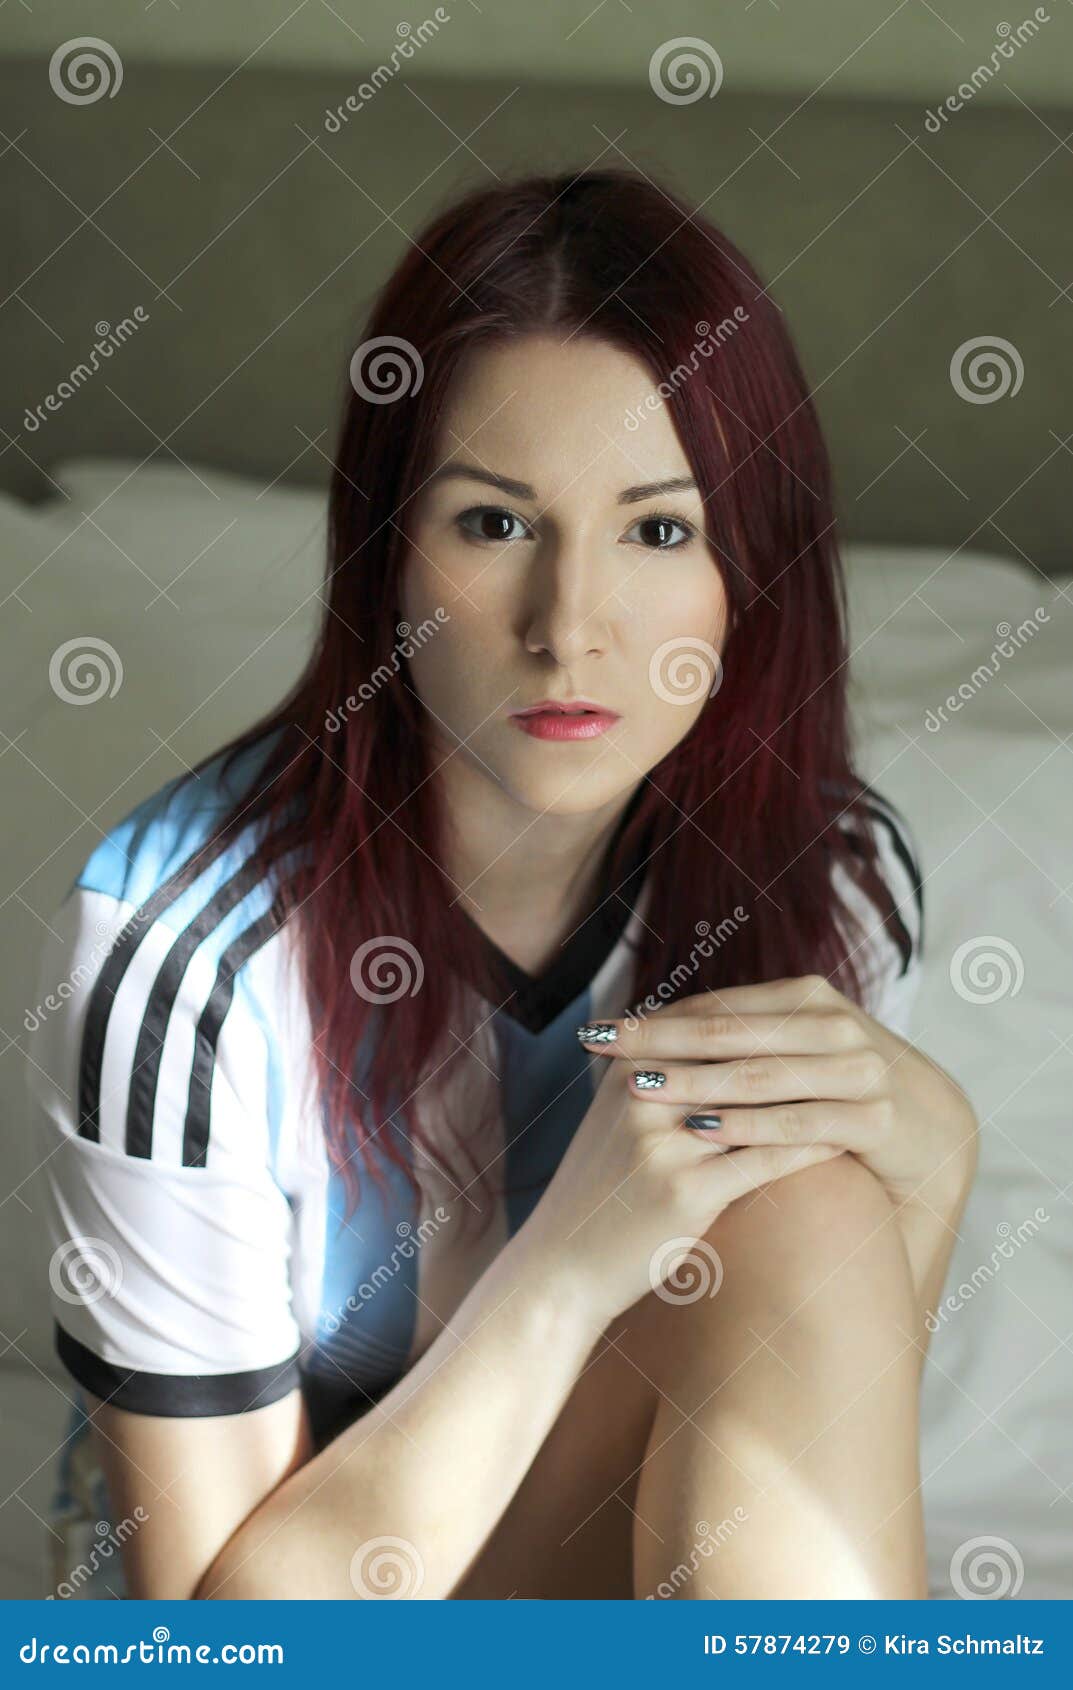 the redhead young woman in argentinean socker trikot portrait